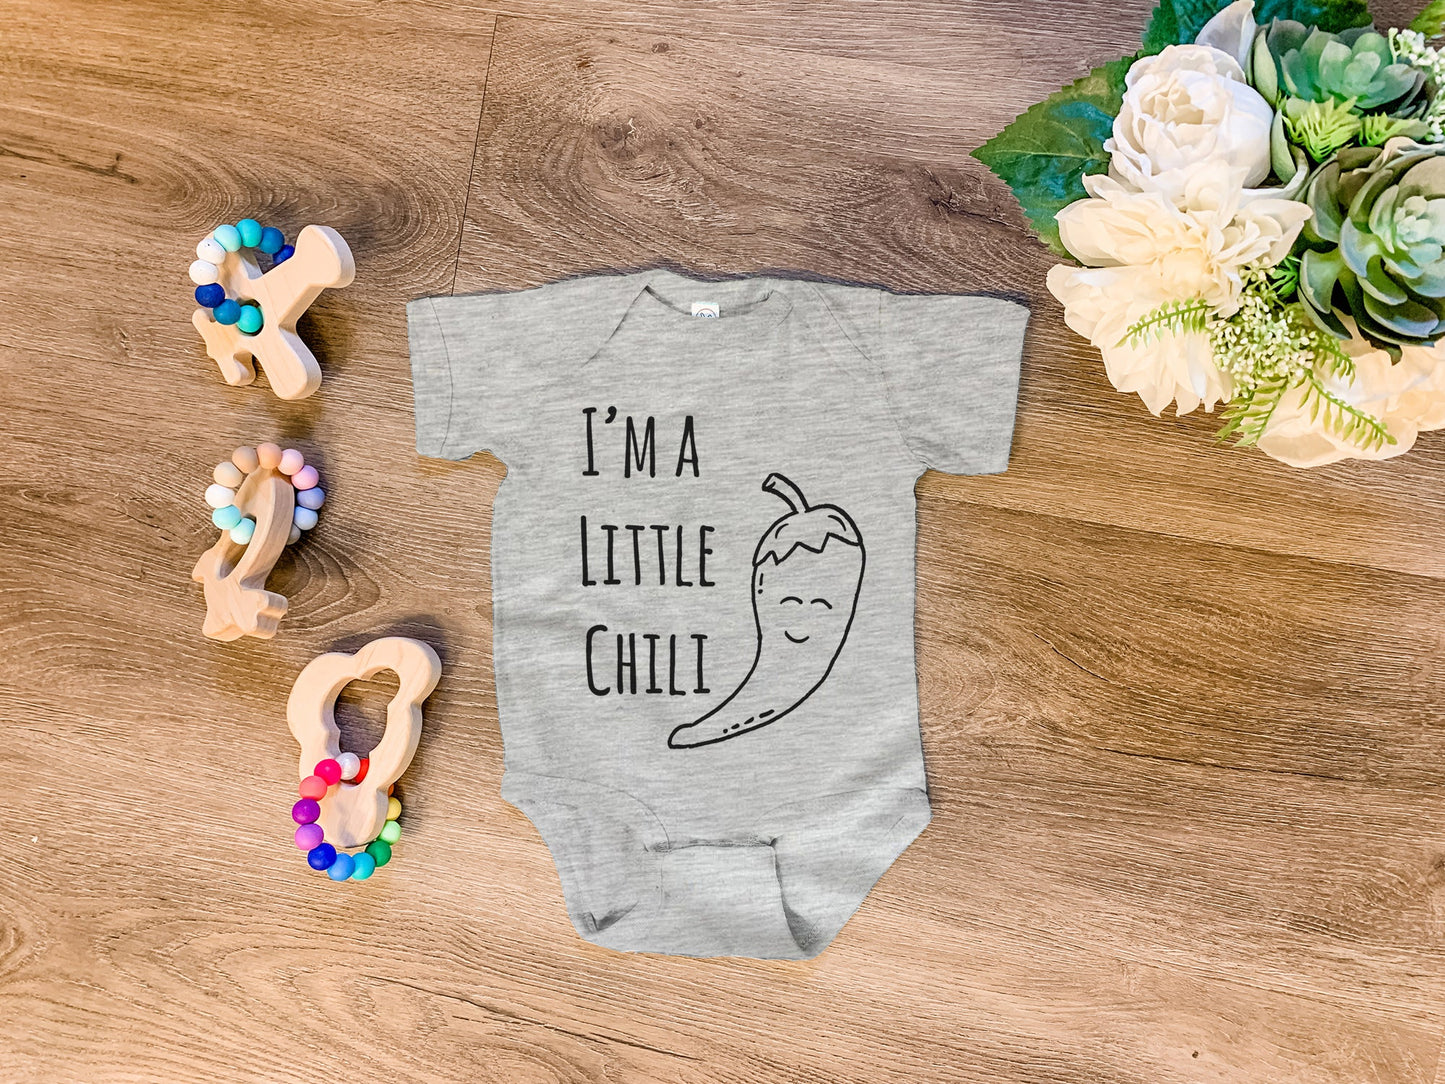 I'm A Little Chili - Onesie - Heather Gray, Chill, or Lavender